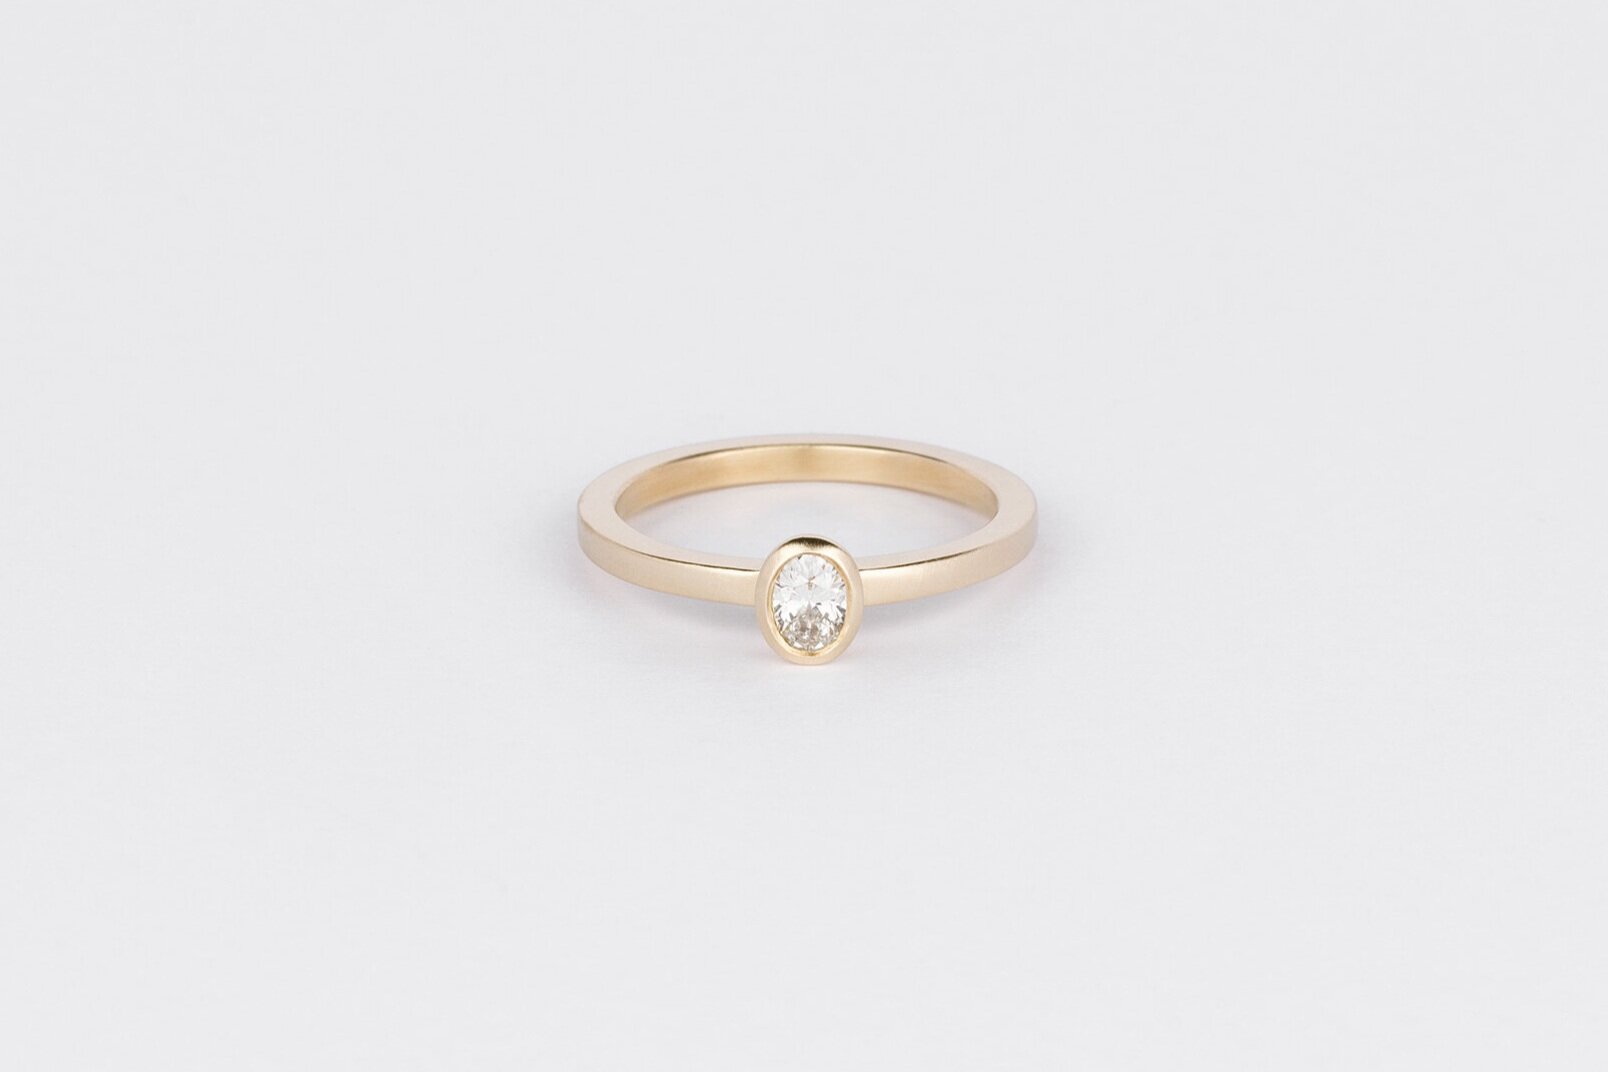  Fairtrade 9ct yellow gold ring set with oval diamond 